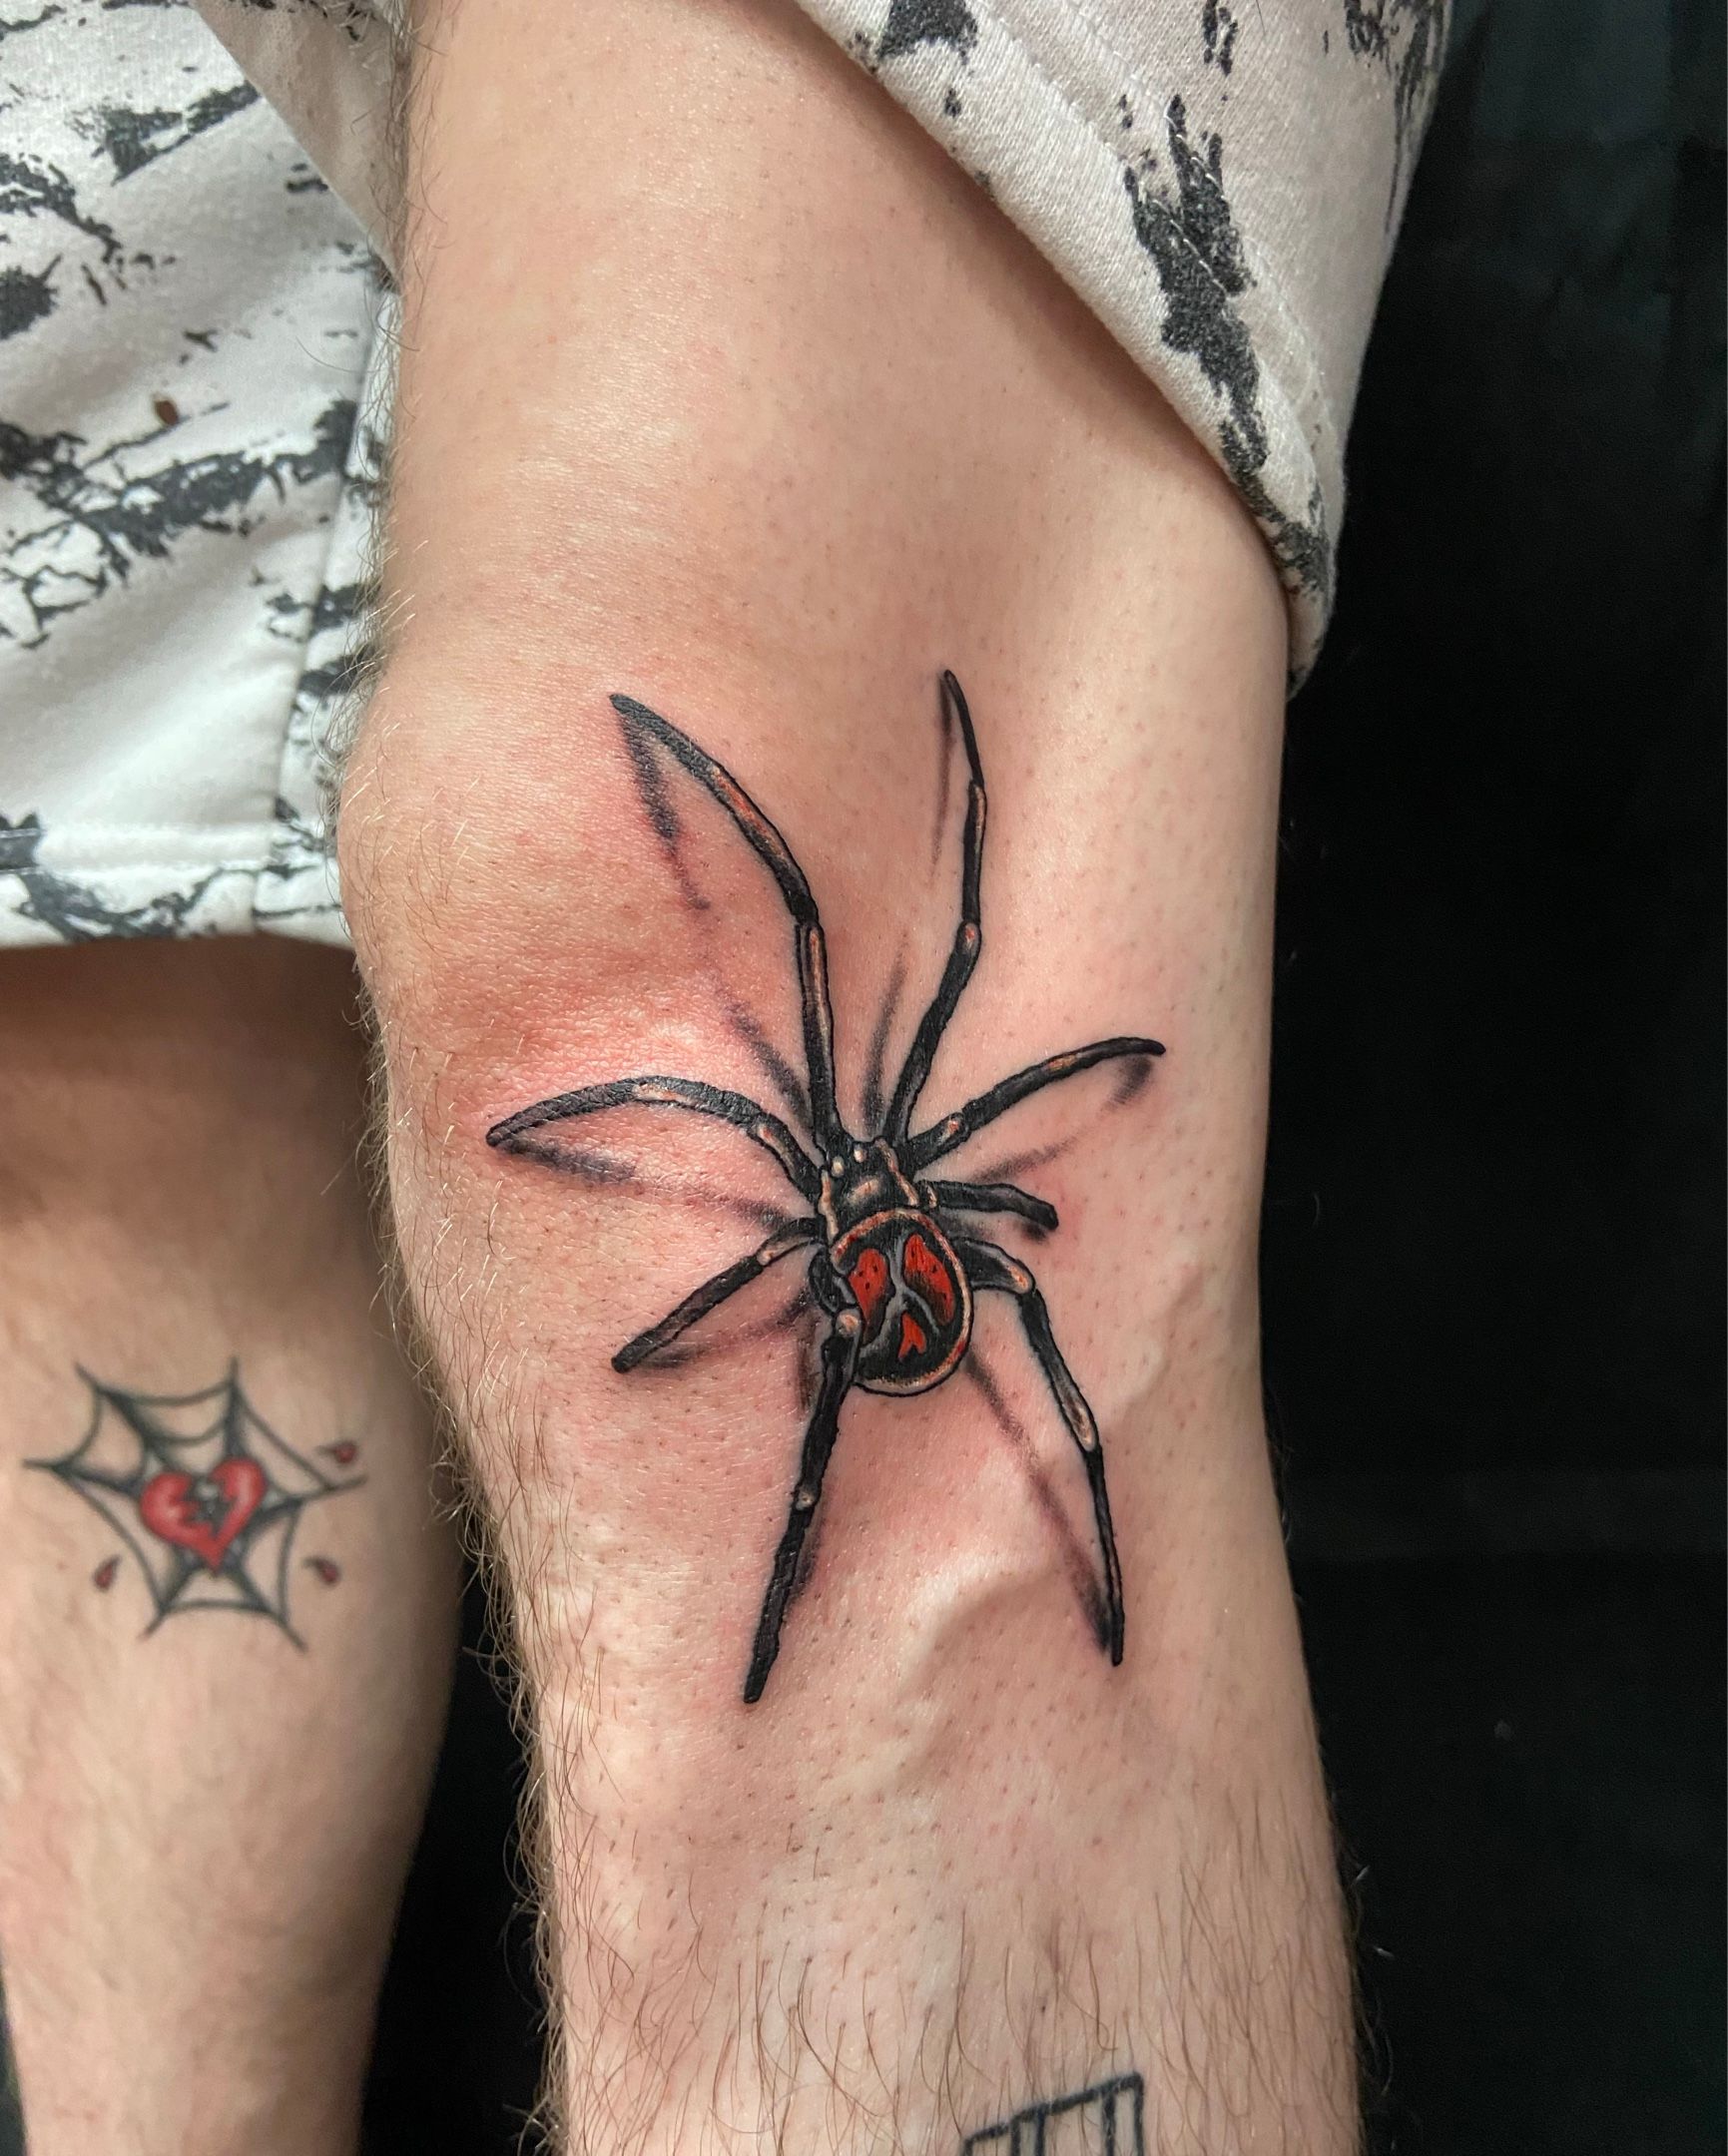 Cool spider tattoo 🕷️💀 | Gallery posted by Zongclub tattoo | Lemon8